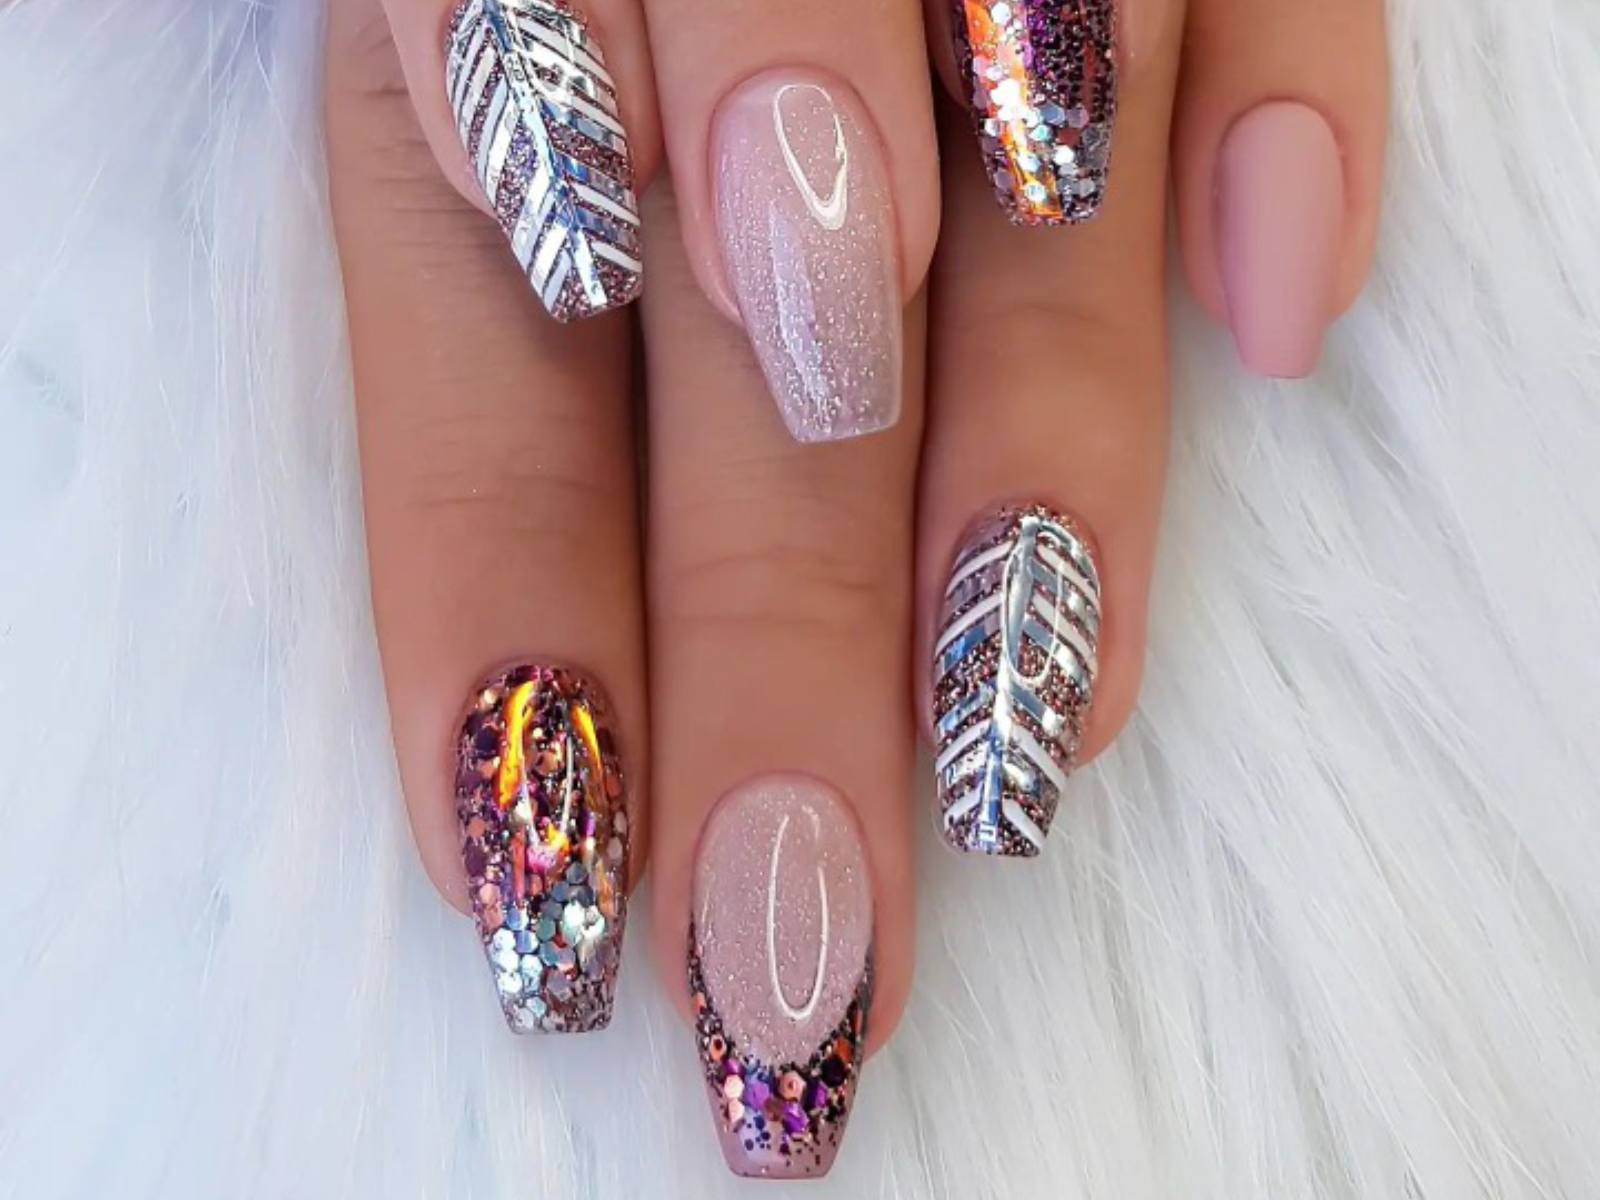 22 Gorgeous Coffin Nails Design and Color Ideas